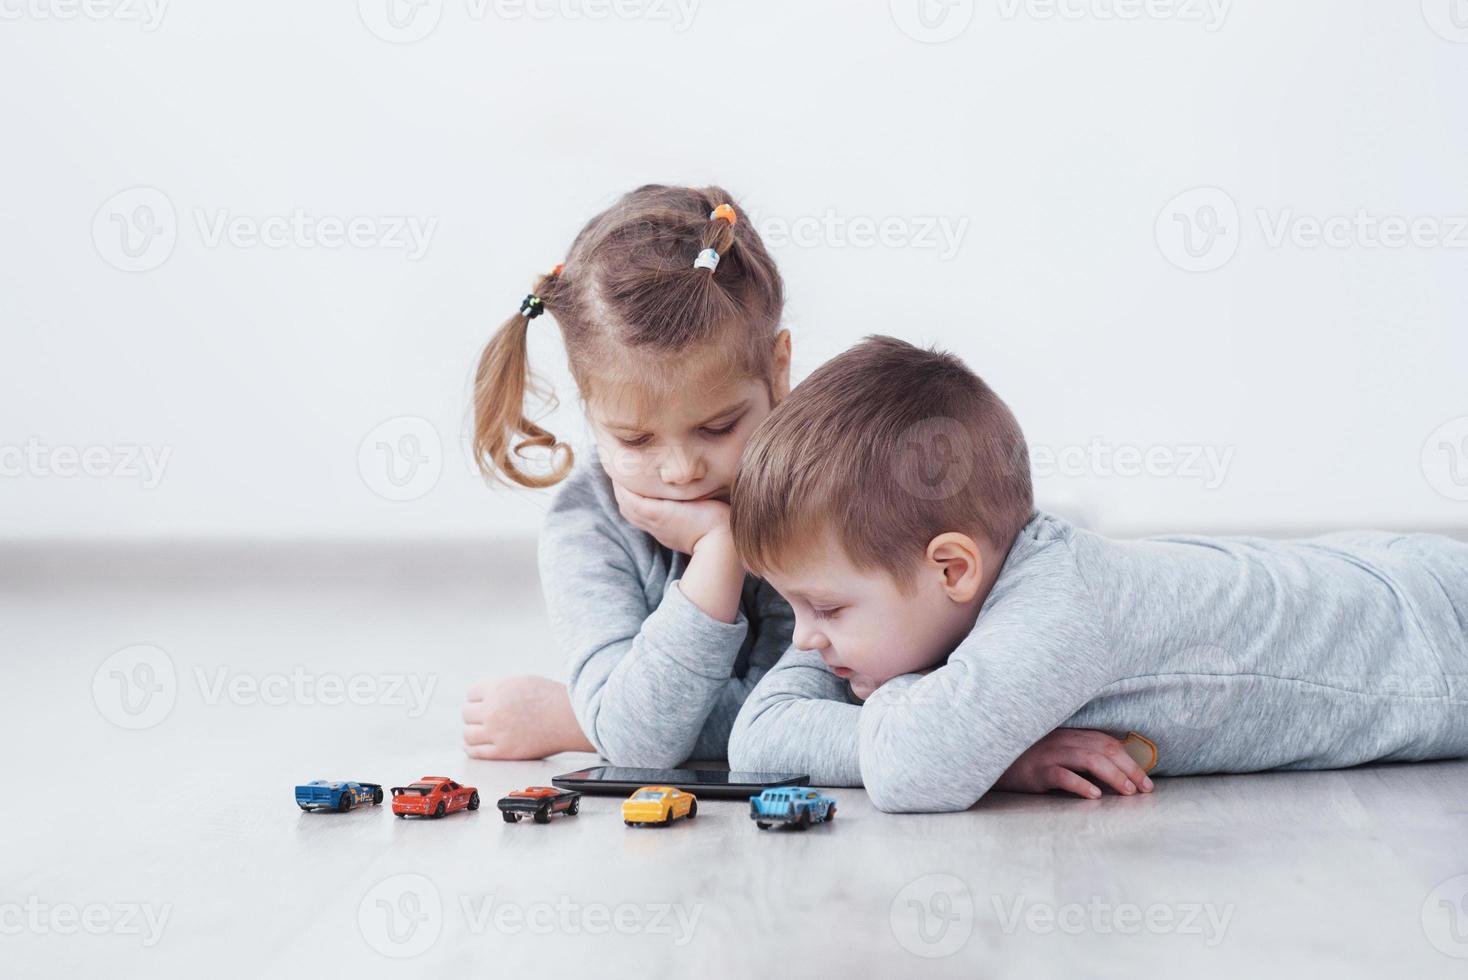 Children using digital gadgets at home. Brother and sister on pajamas watch cartoons and play games on their technology tablet photo